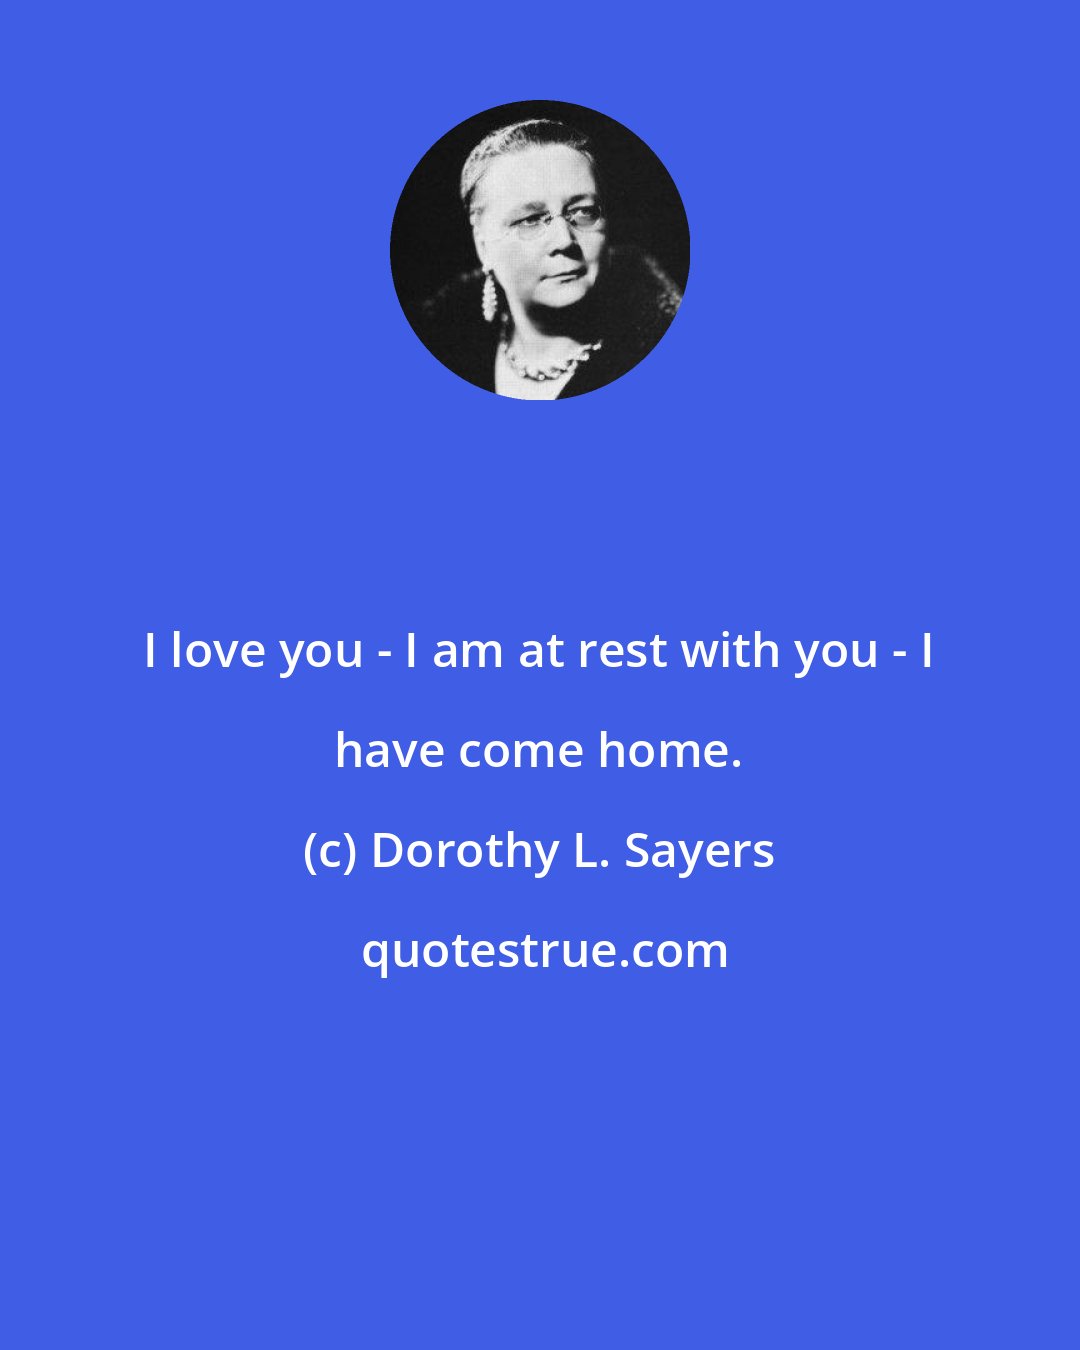 Dorothy L. Sayers: I love you - I am at rest with you - I have come home.